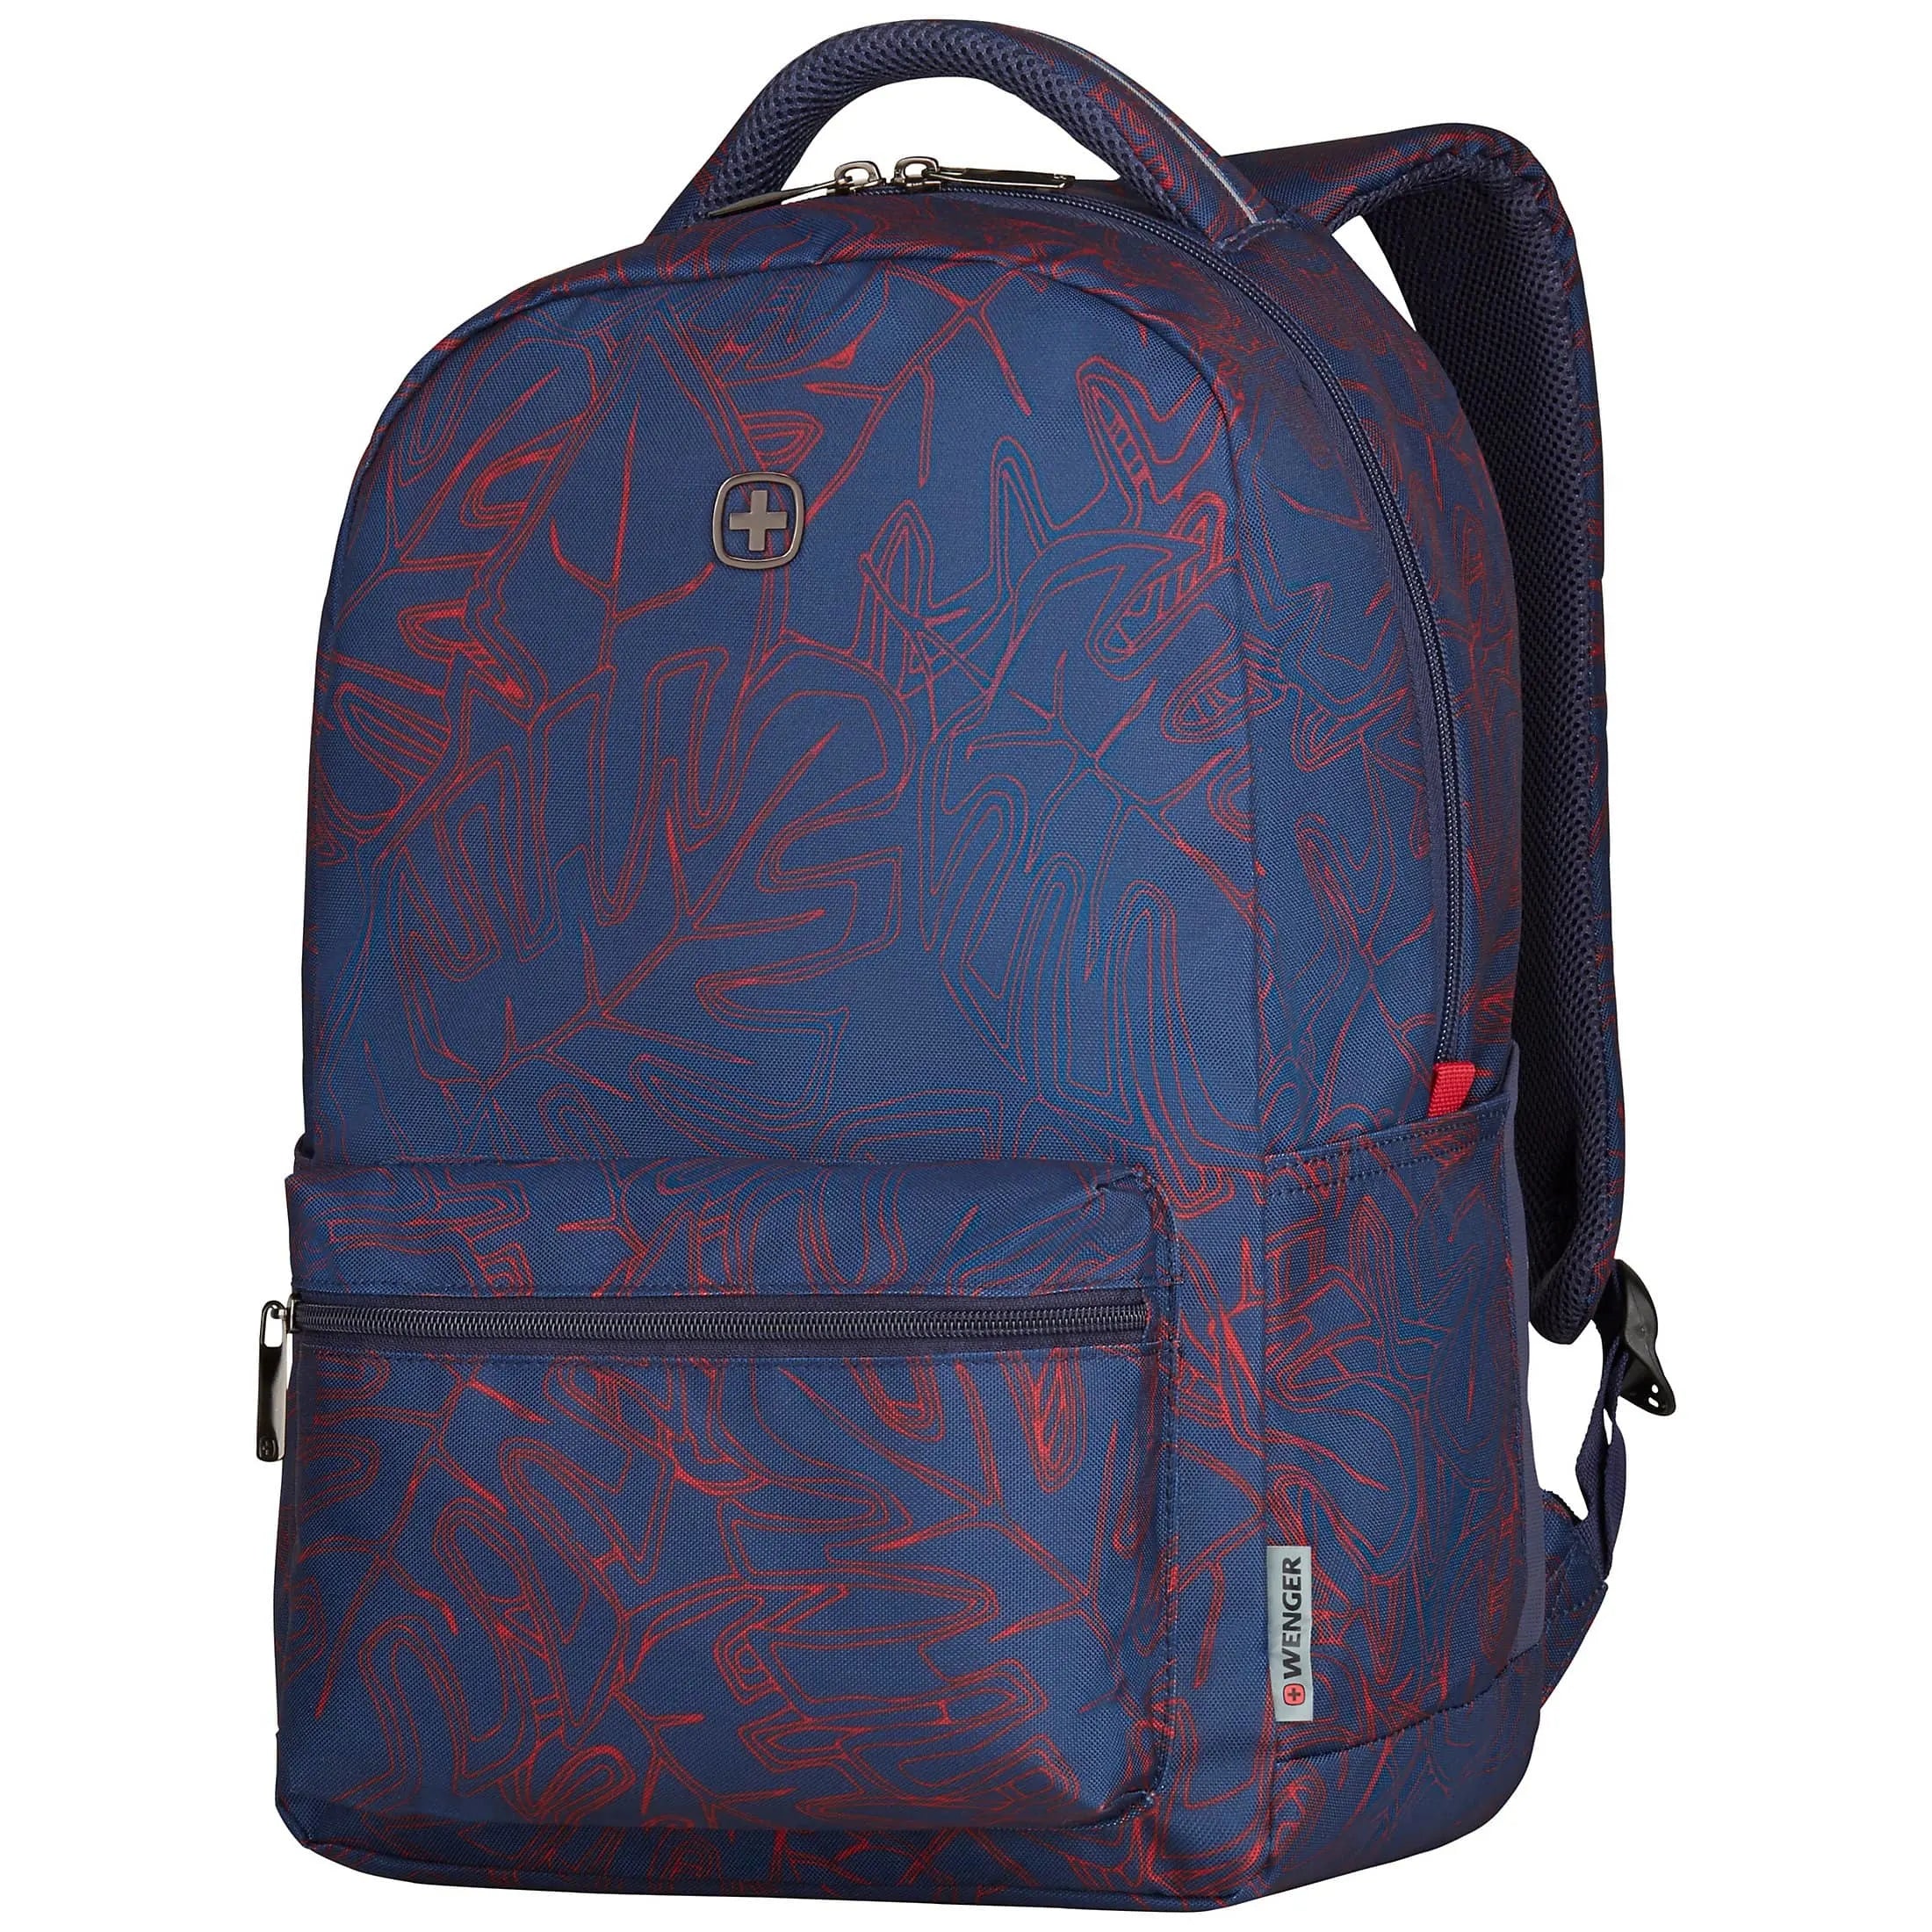 Wenger Business Colleague Laptop Backpack 16 inch 45 cm - Navy Outline Print